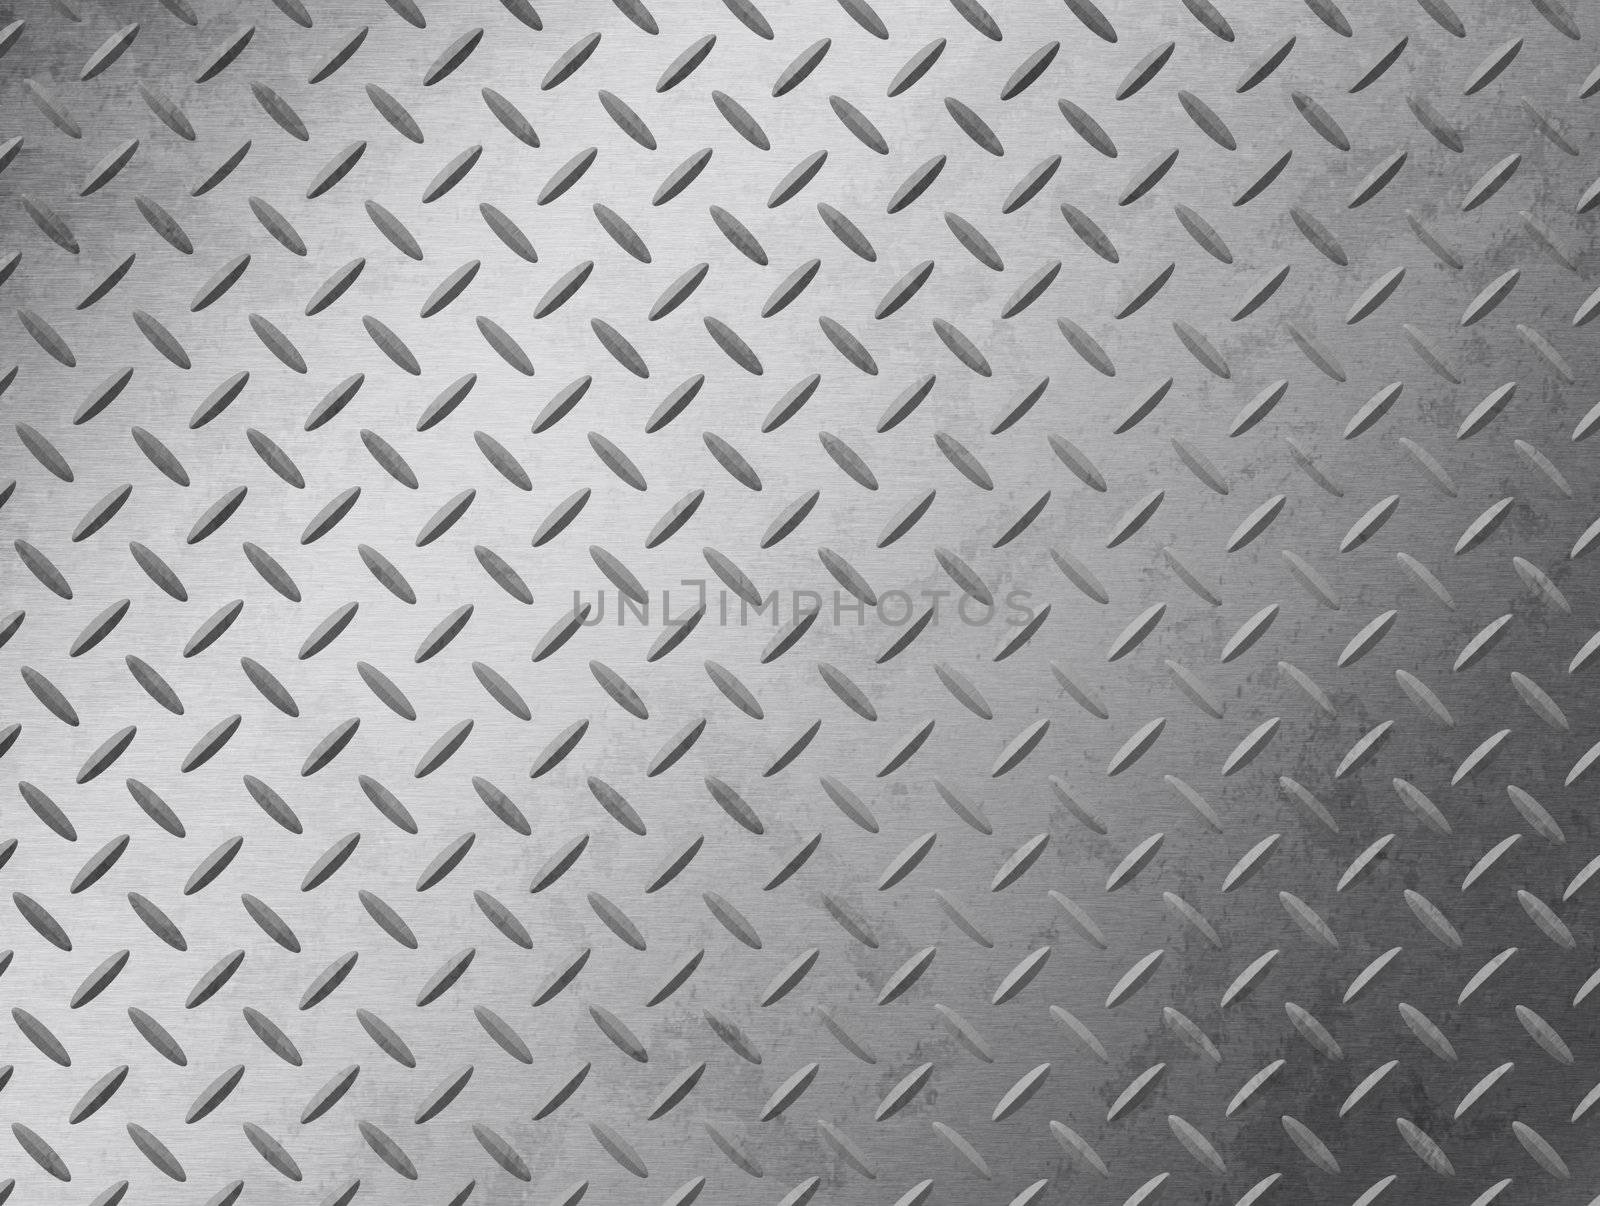 Image of a grungy diamond plate texture.